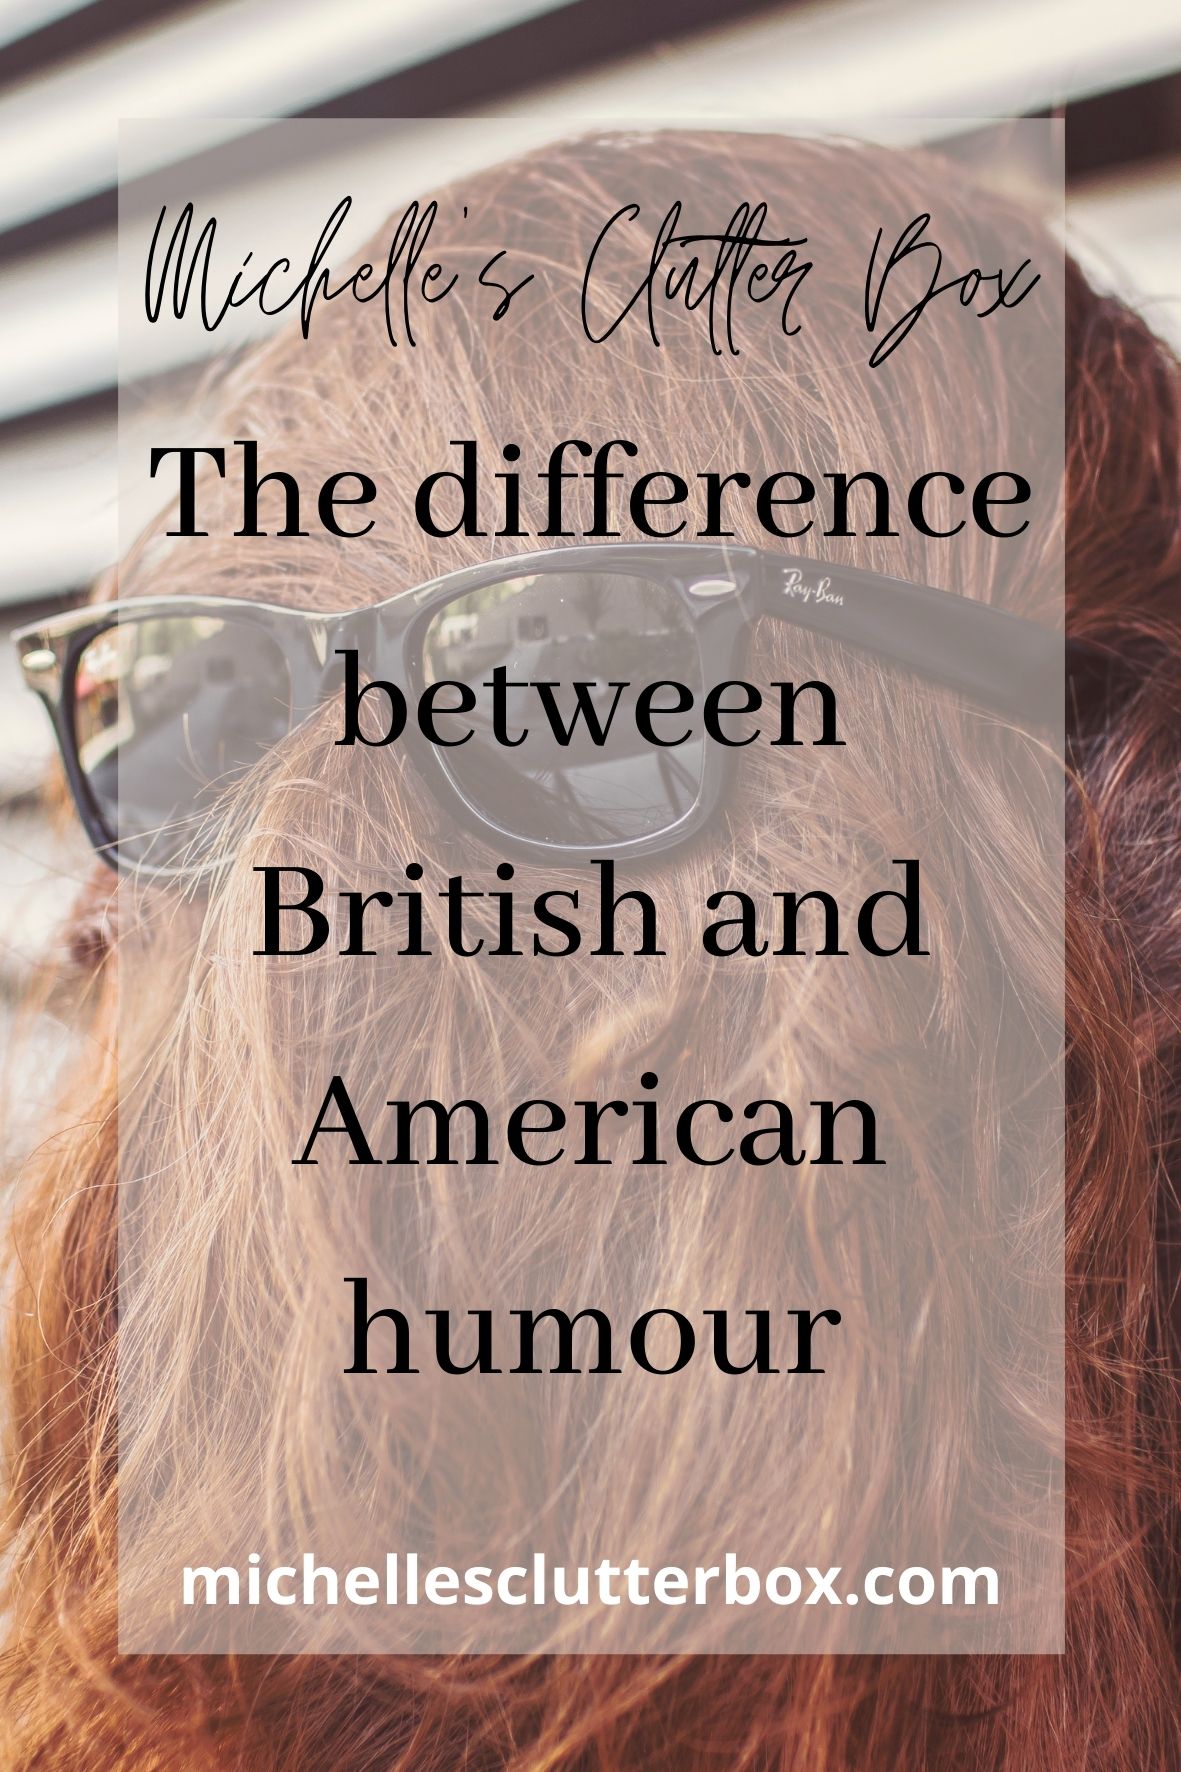 The difference between British and American humour